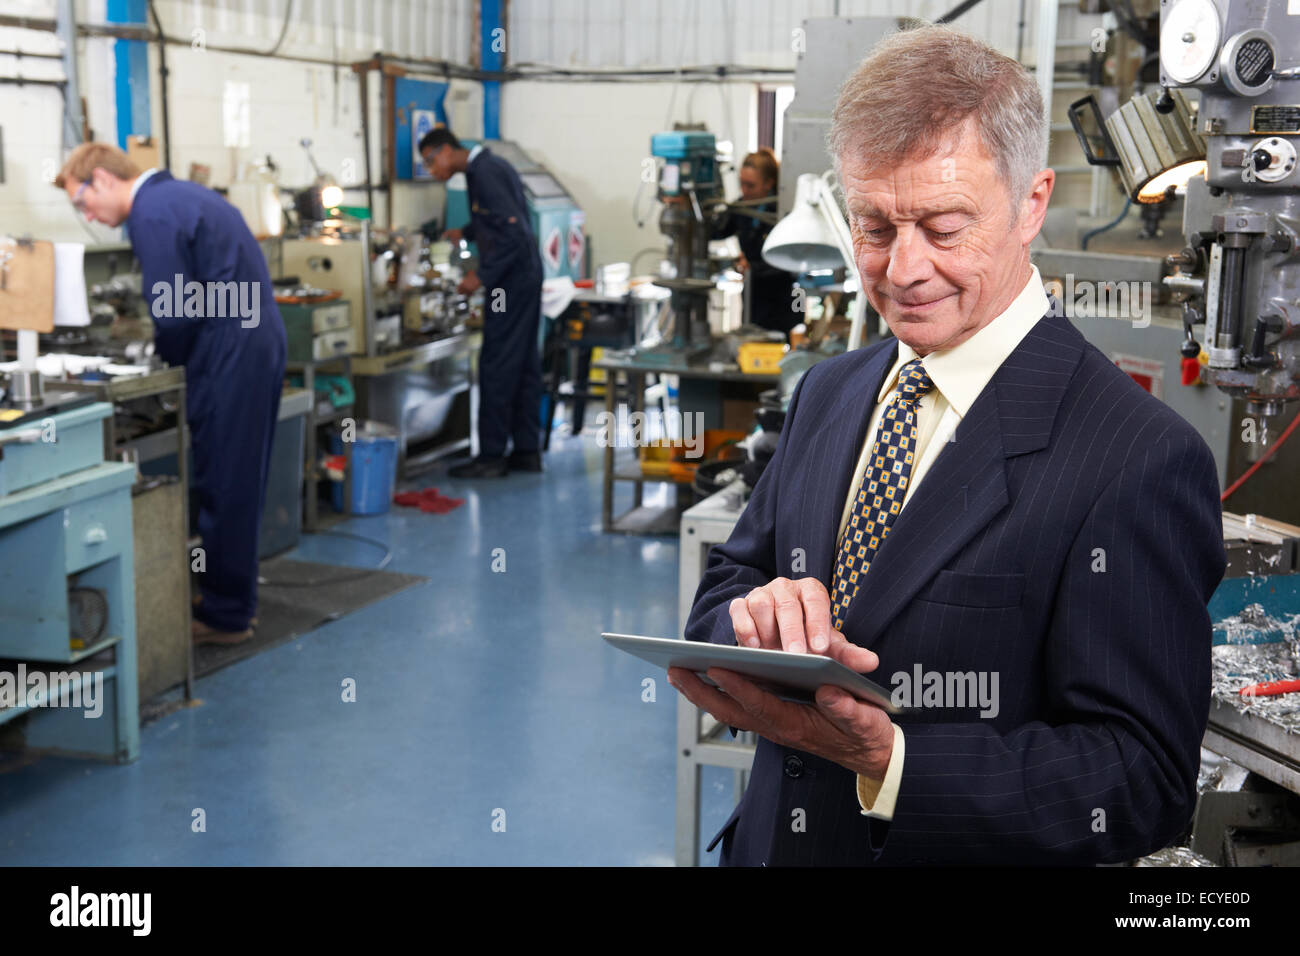 Owner Of Engineering Factory Using Digital Tablet With Staff In Background Stock Photo